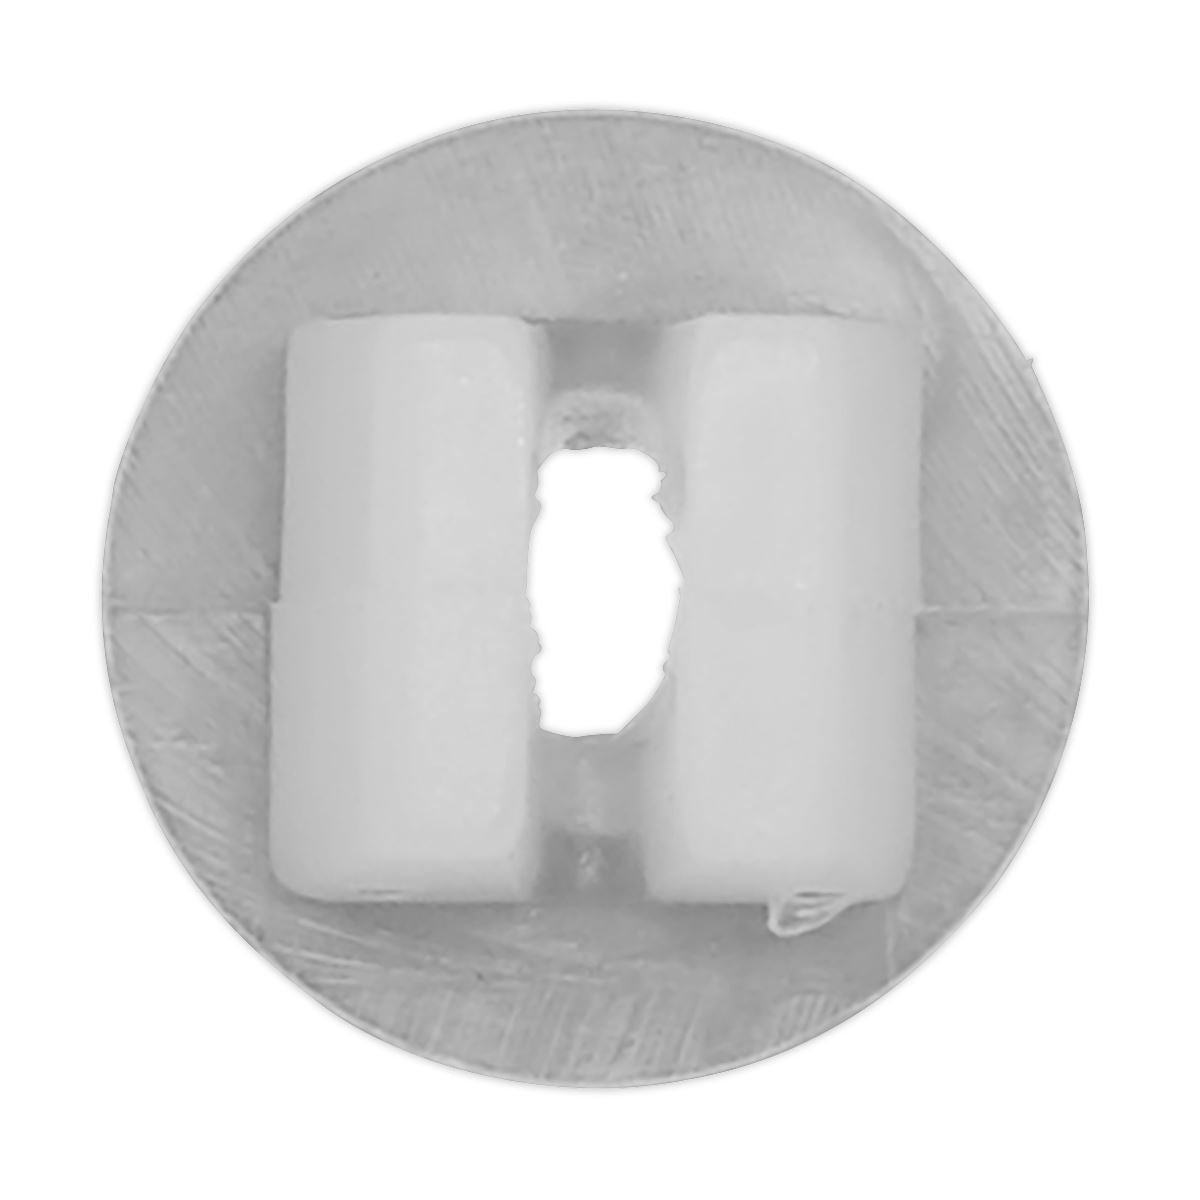 Sealey Captive Nut, Ø16mm x 12mm, Universal - Pack of 20